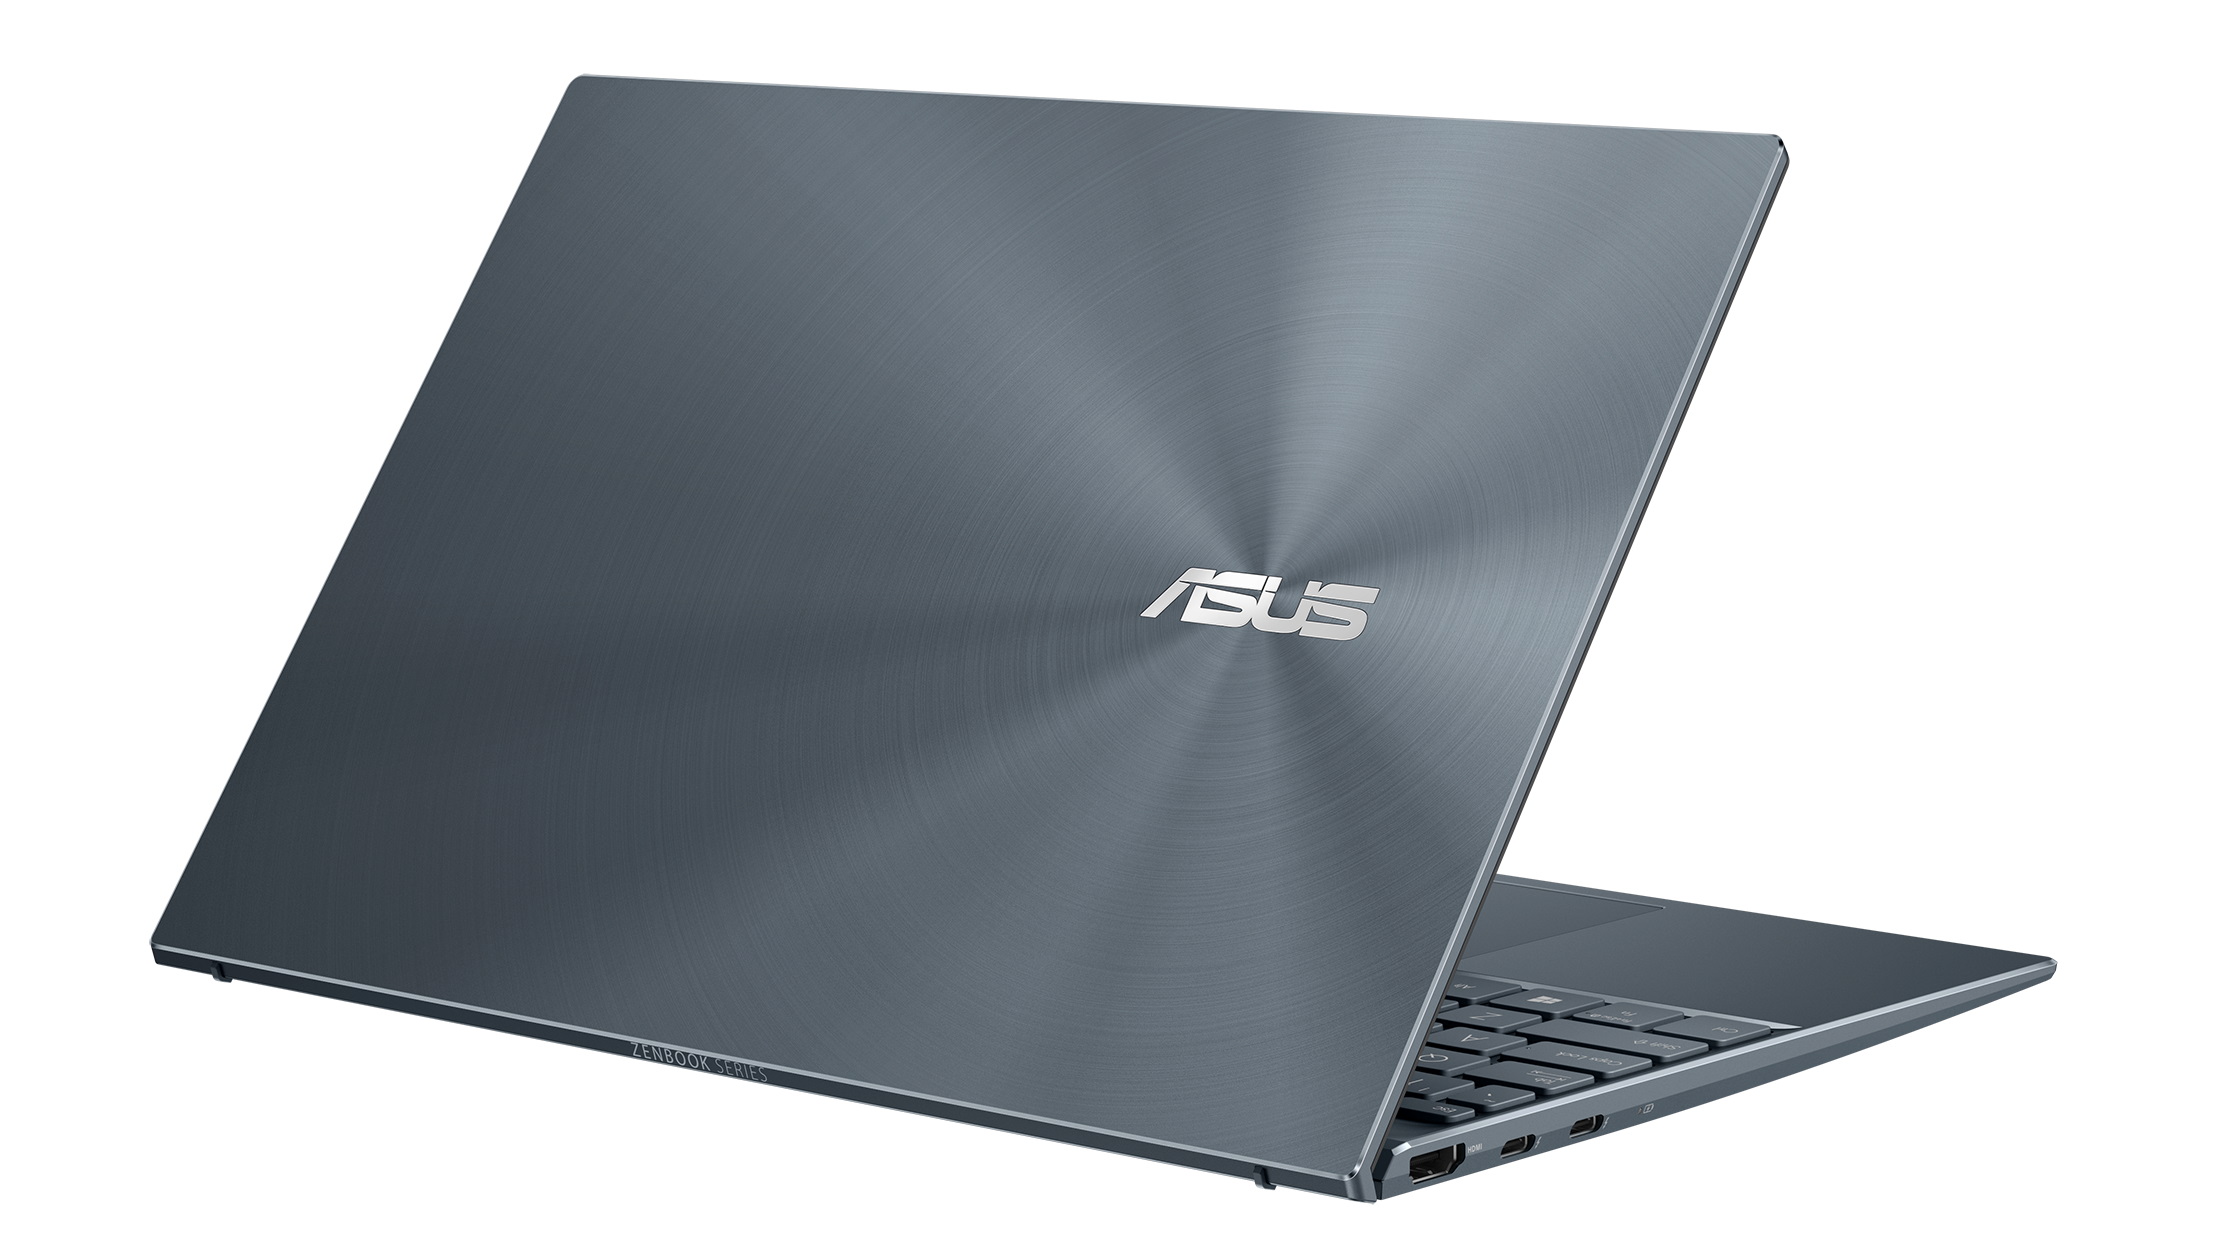 Back shot of Asus ZenBook 13 (2021) laptop with screen open on white background